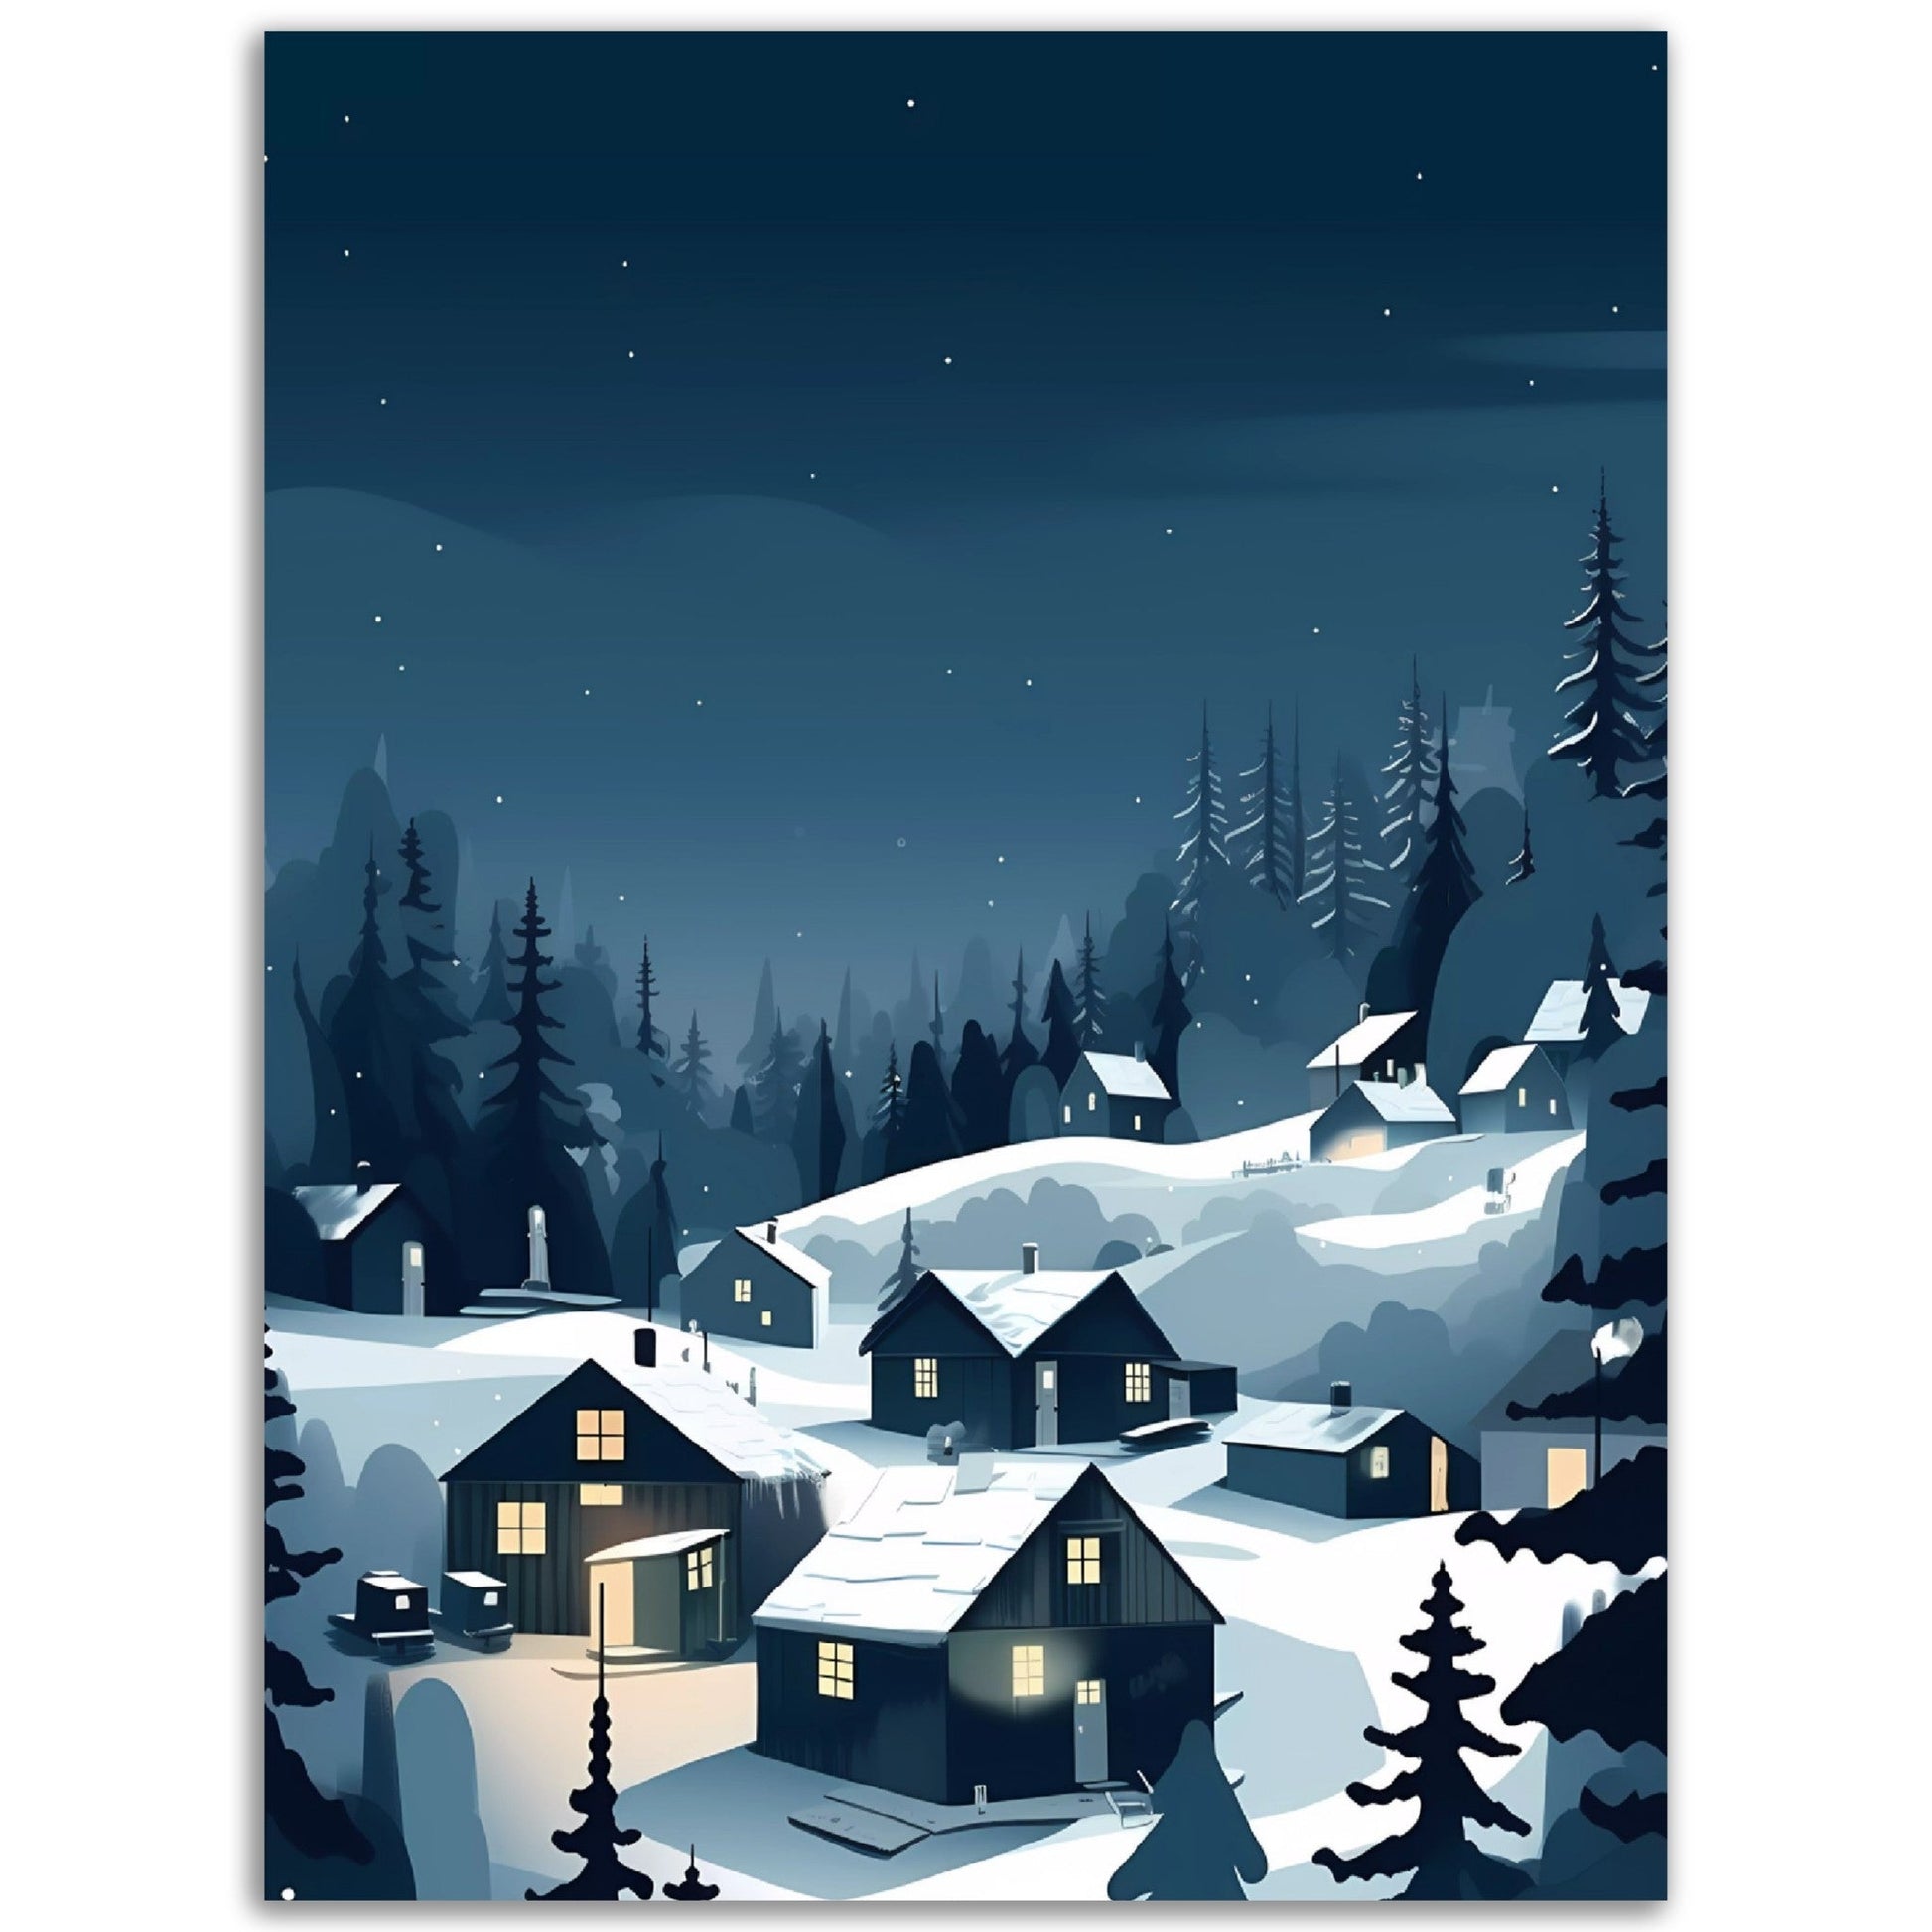 A colored wall art poster of an Evening Winter Village.